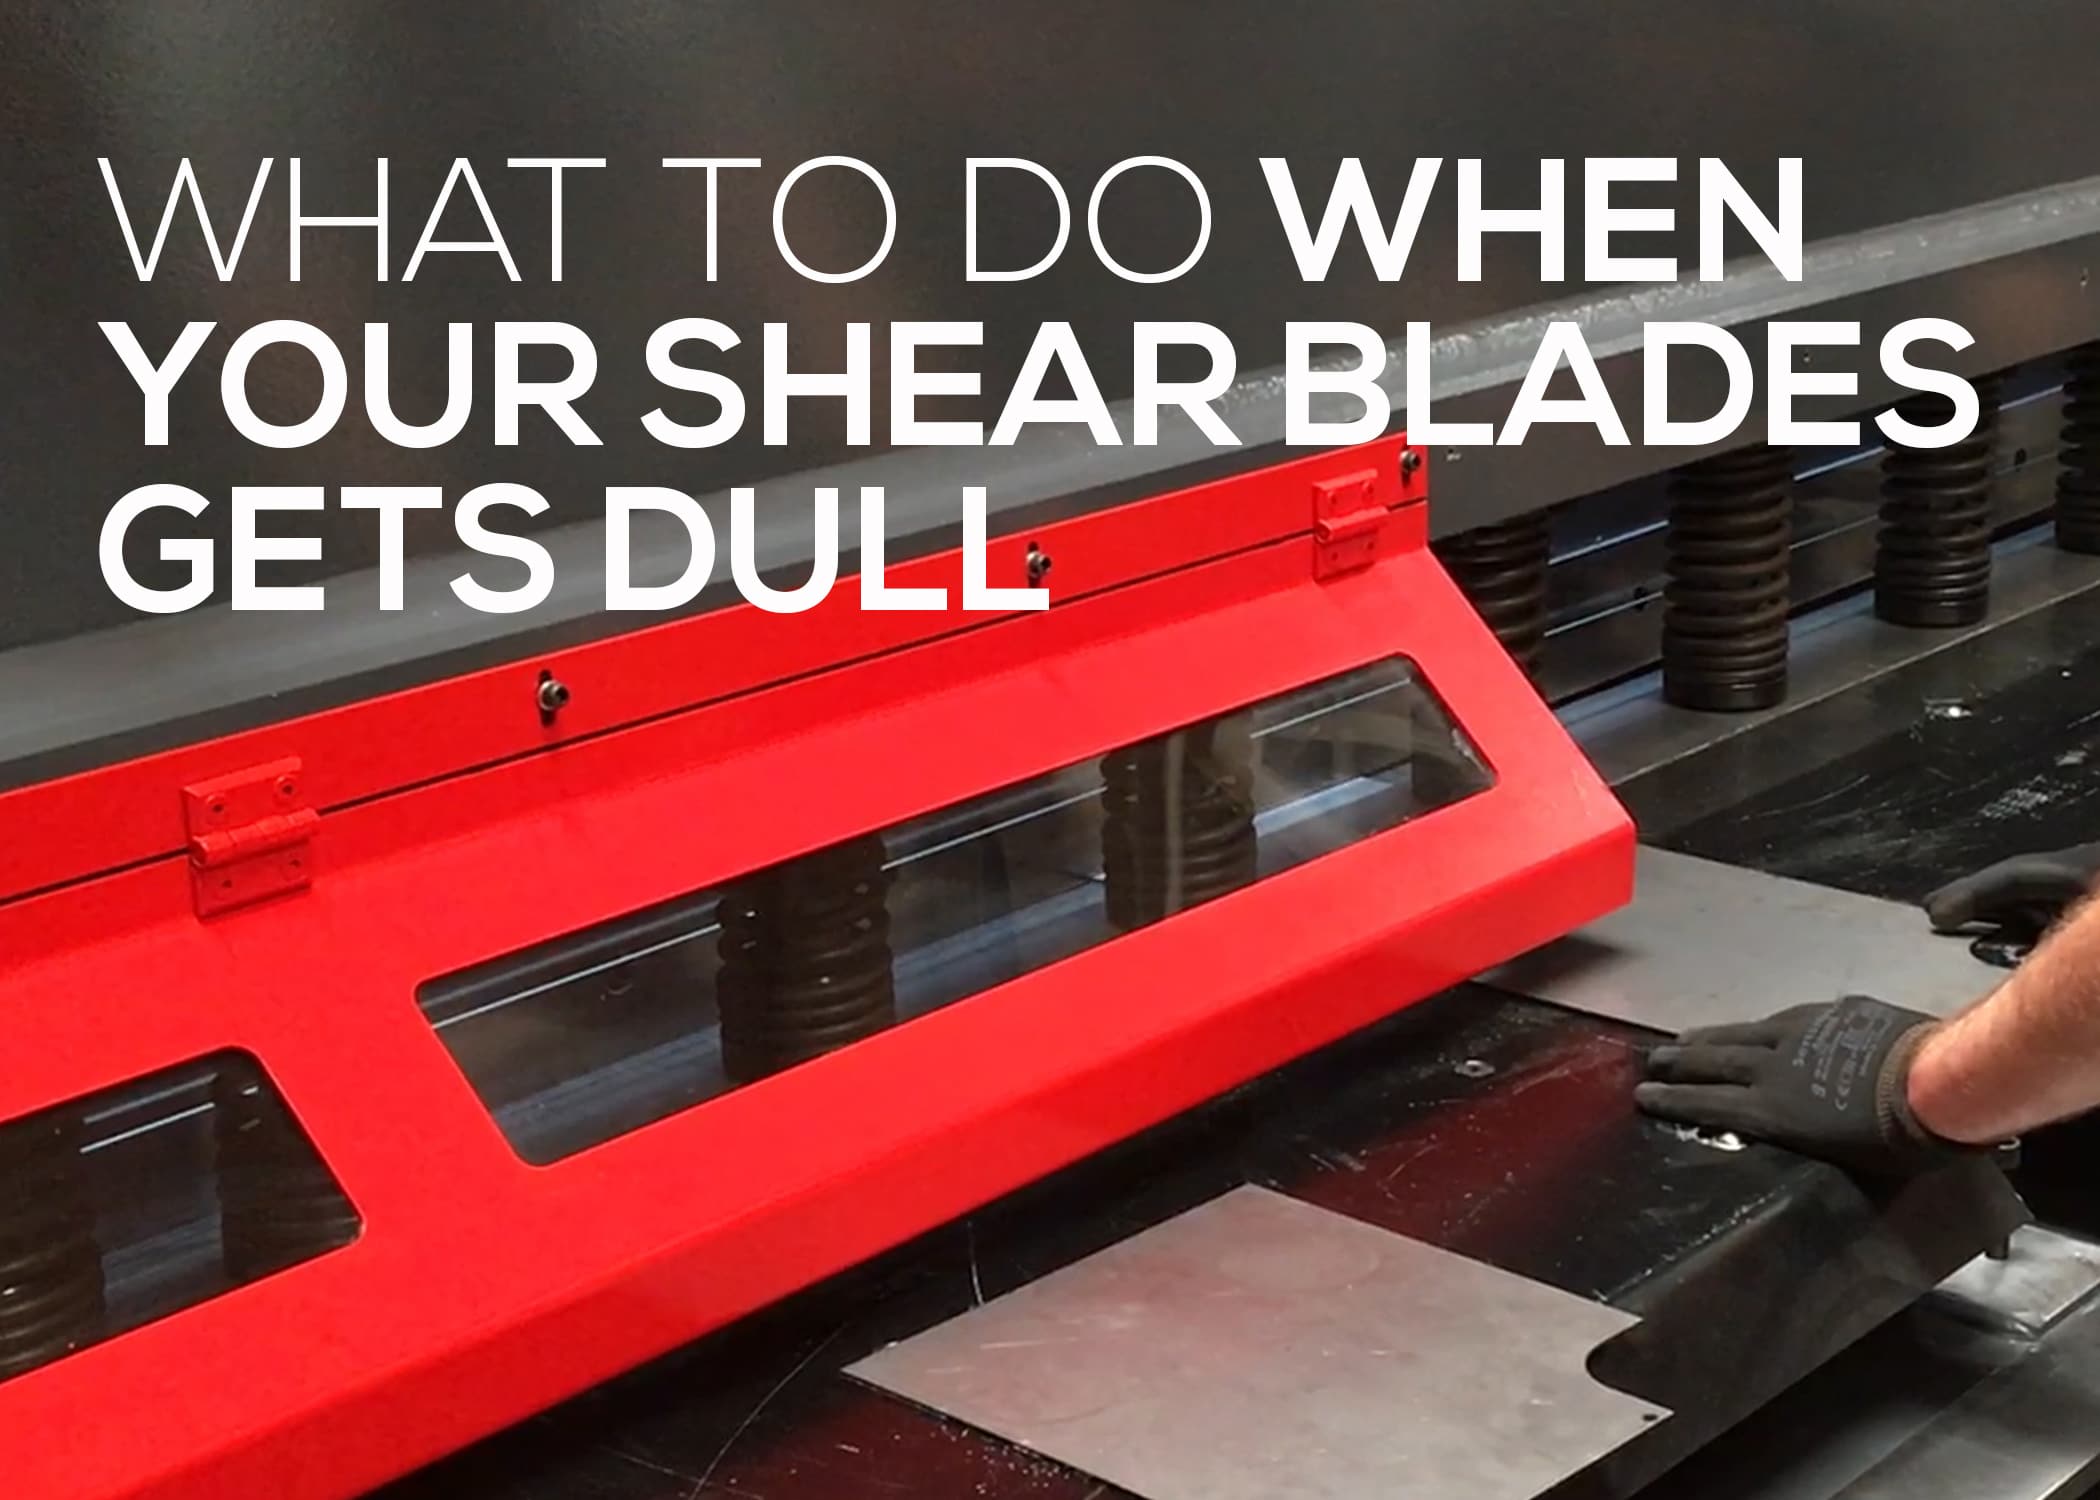 What to Do When Your Shear Blades Gets Dull